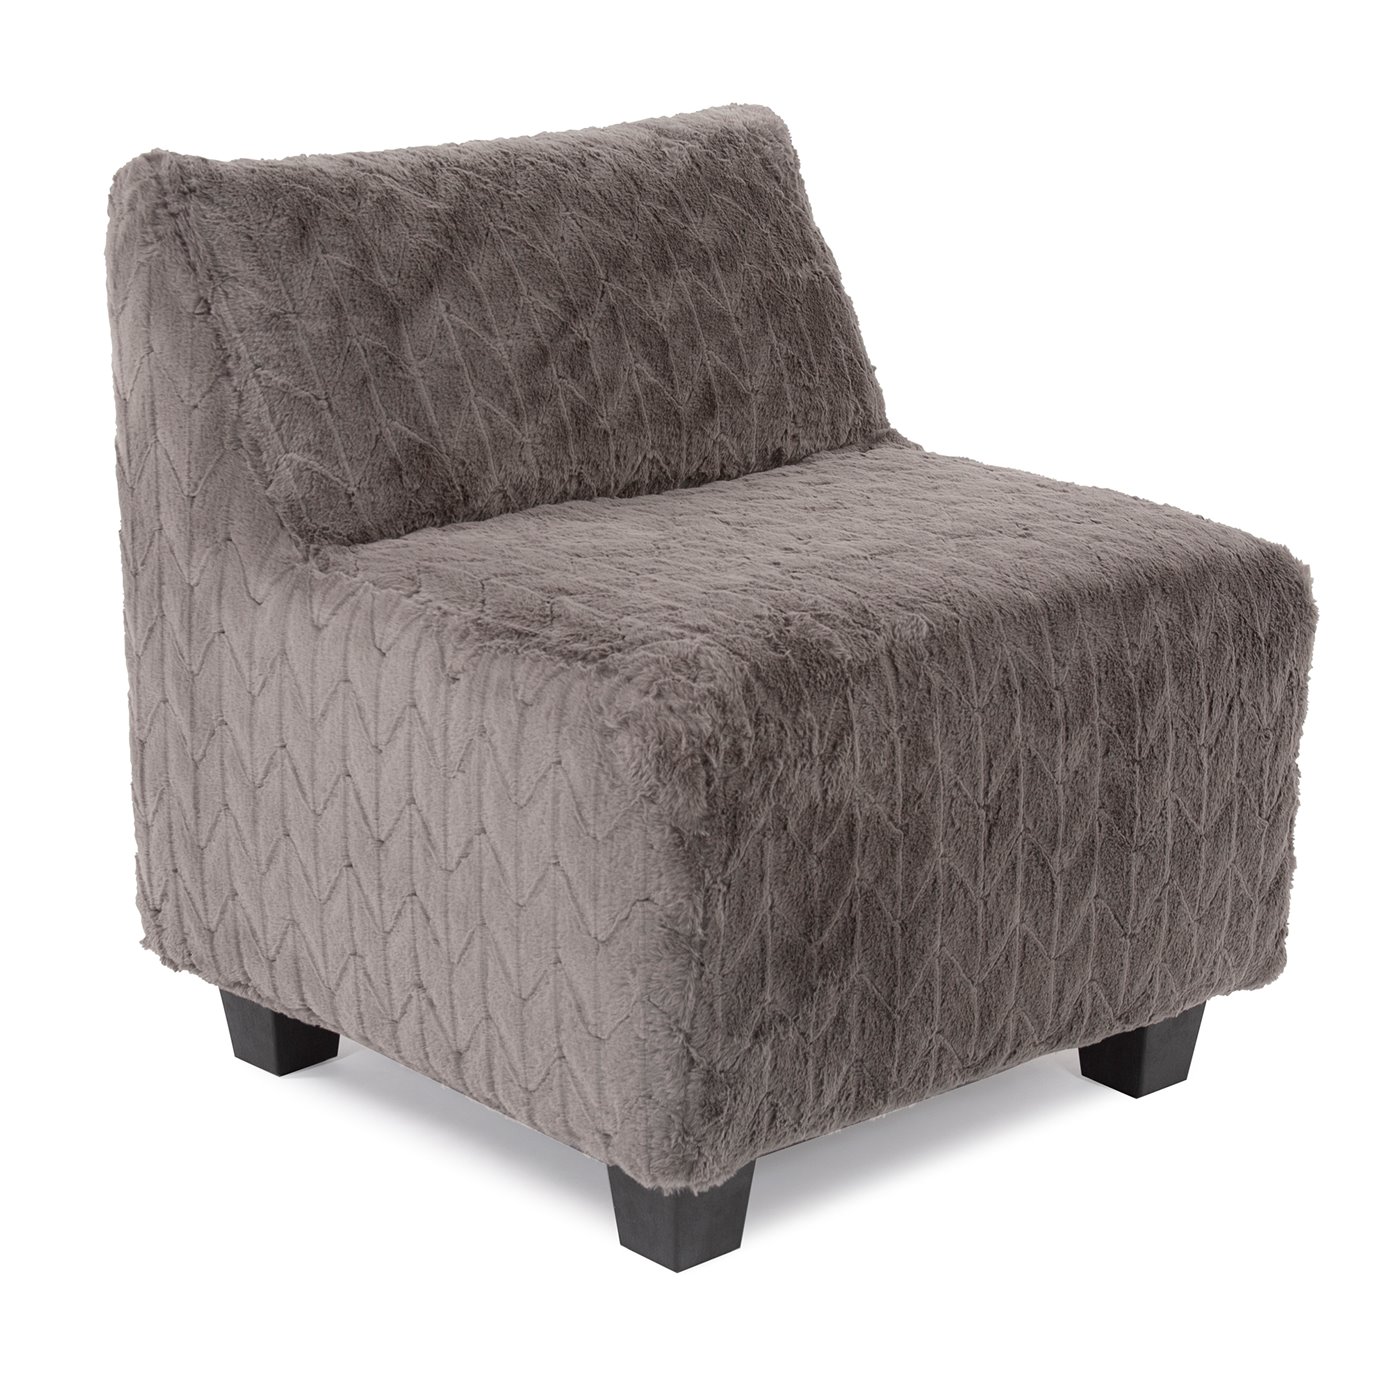 Howard Elliott Pod Chair Cover Faux Fur Angora Stone - Cover Only, Chair Base Not Included